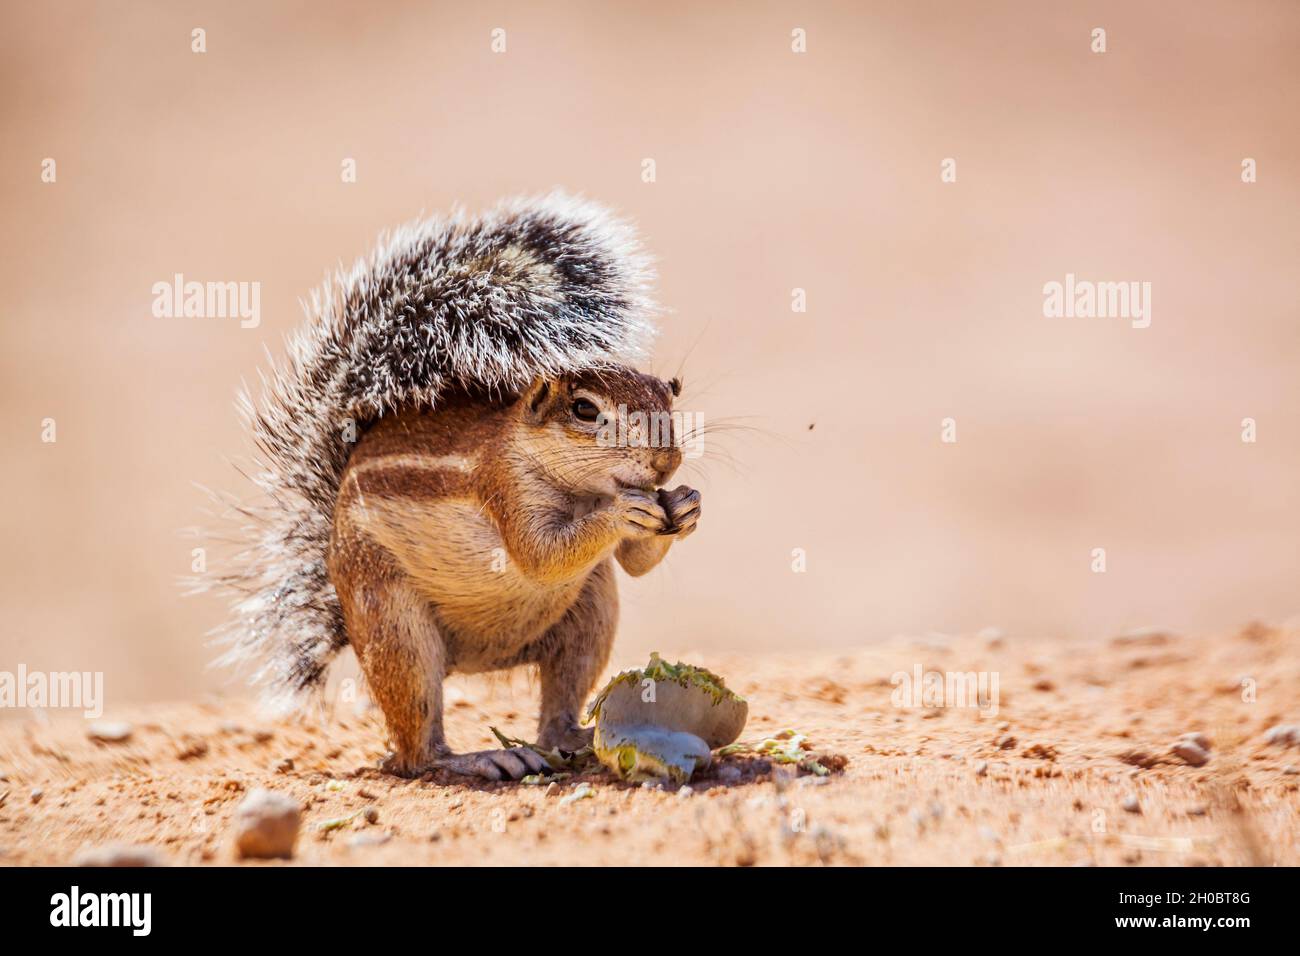 Cape ground squirrel (Xerus inauris) eating seed isolated in natural background in Kgalagadi transfrontier park, South Africa Stock Photo